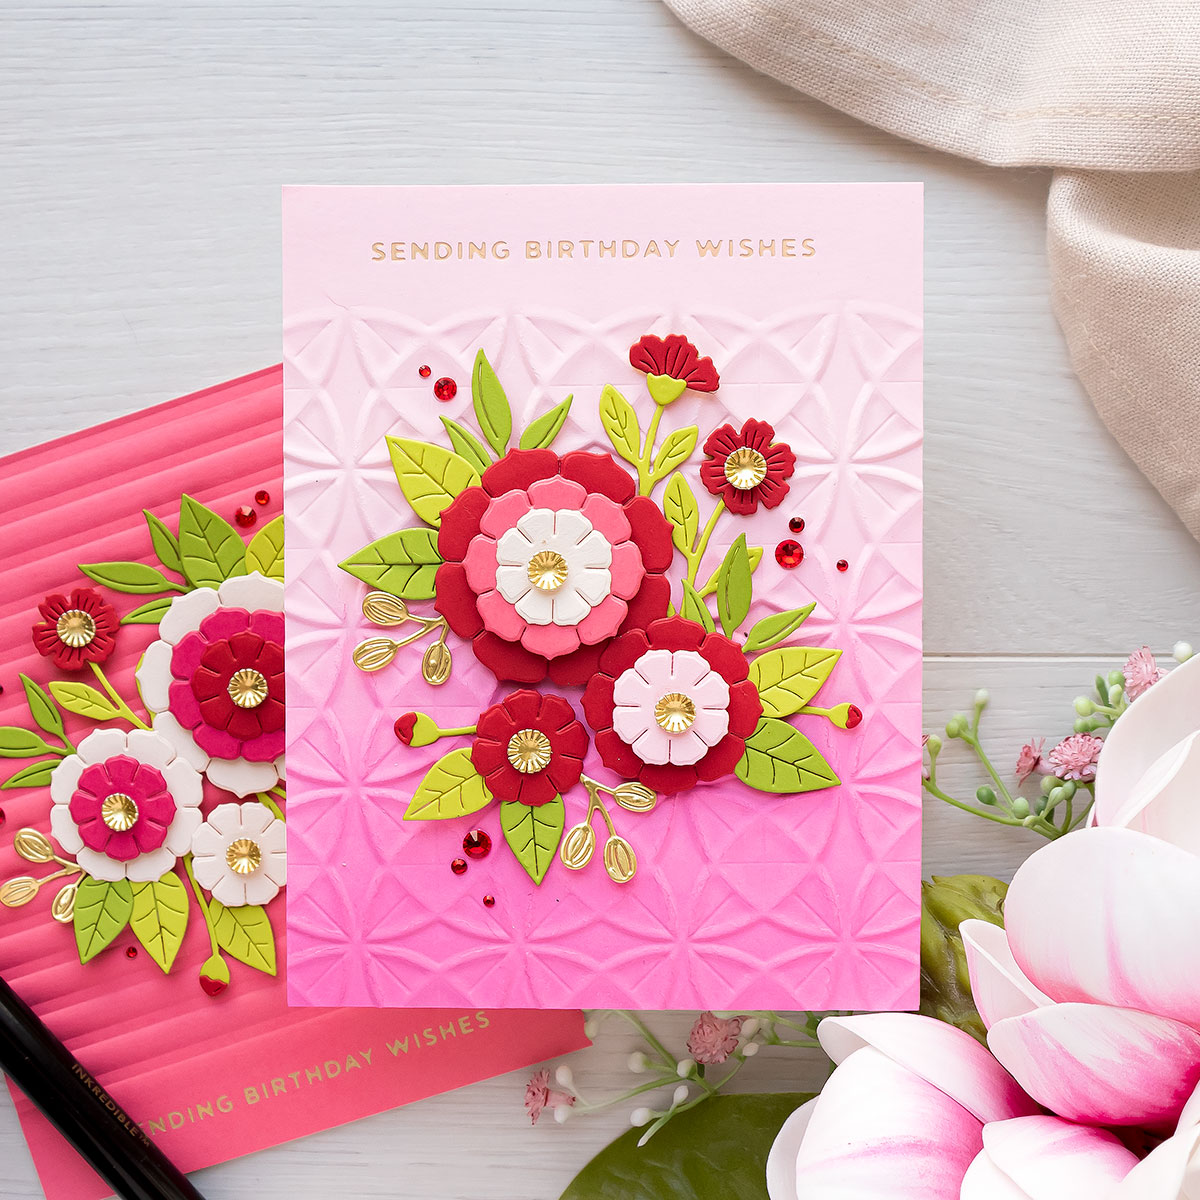 3 Clever Embossing Folder Techniques for Greeting Cards